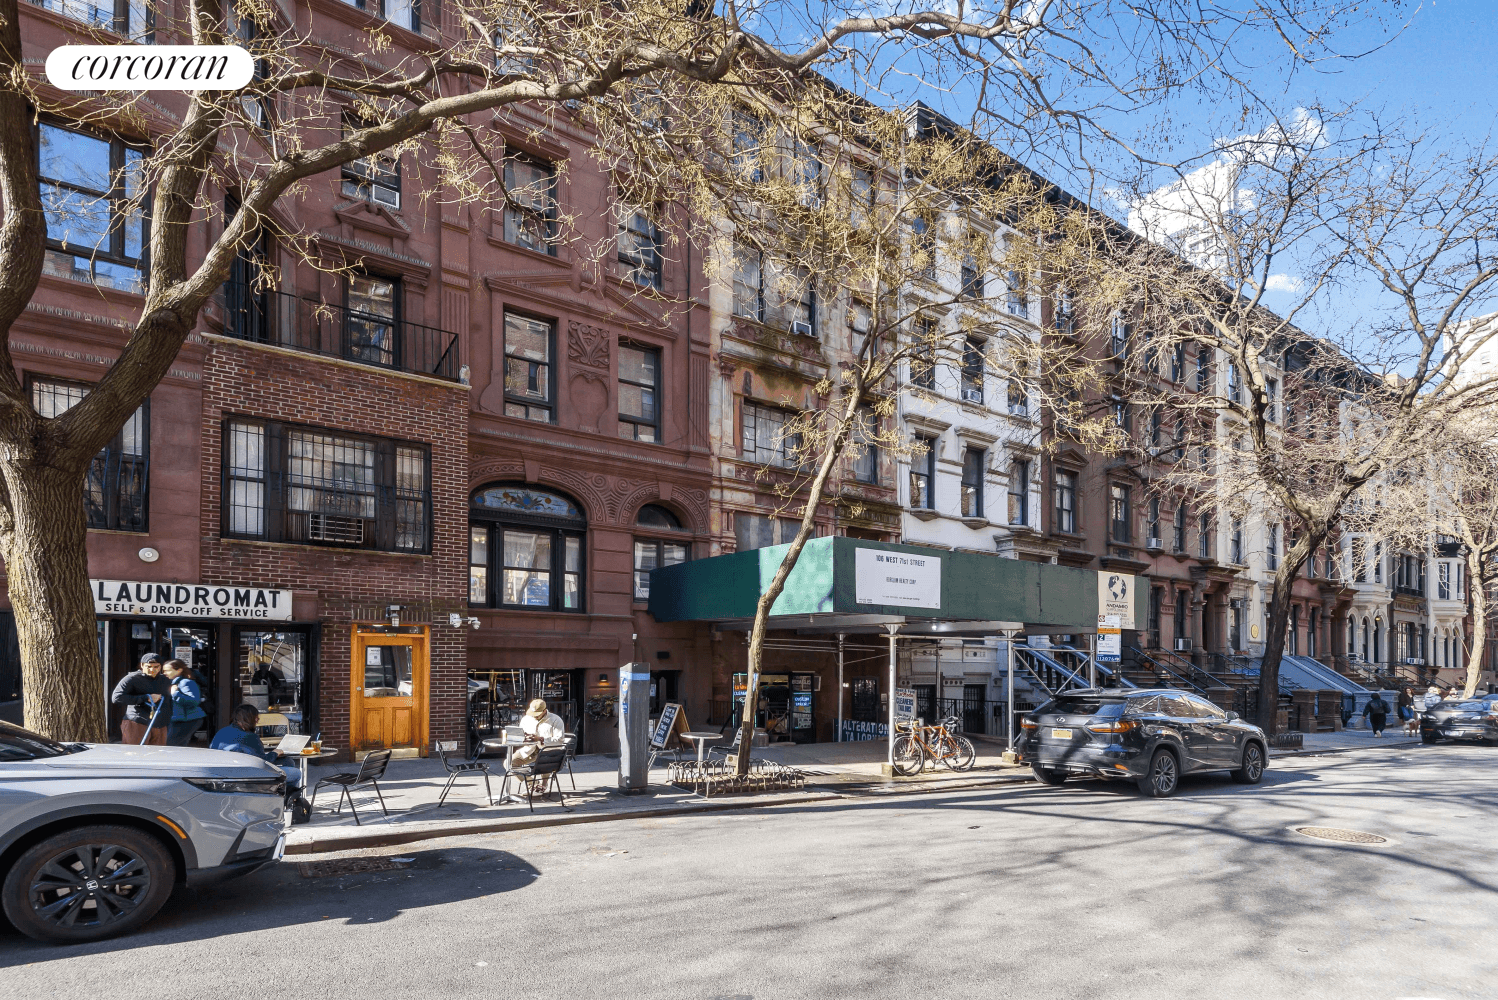 We are happy to present the exclusive sale of 114 West 71st street, a Ten 10 unit mixed use investment property located at 114 West 71st street in New York, ...